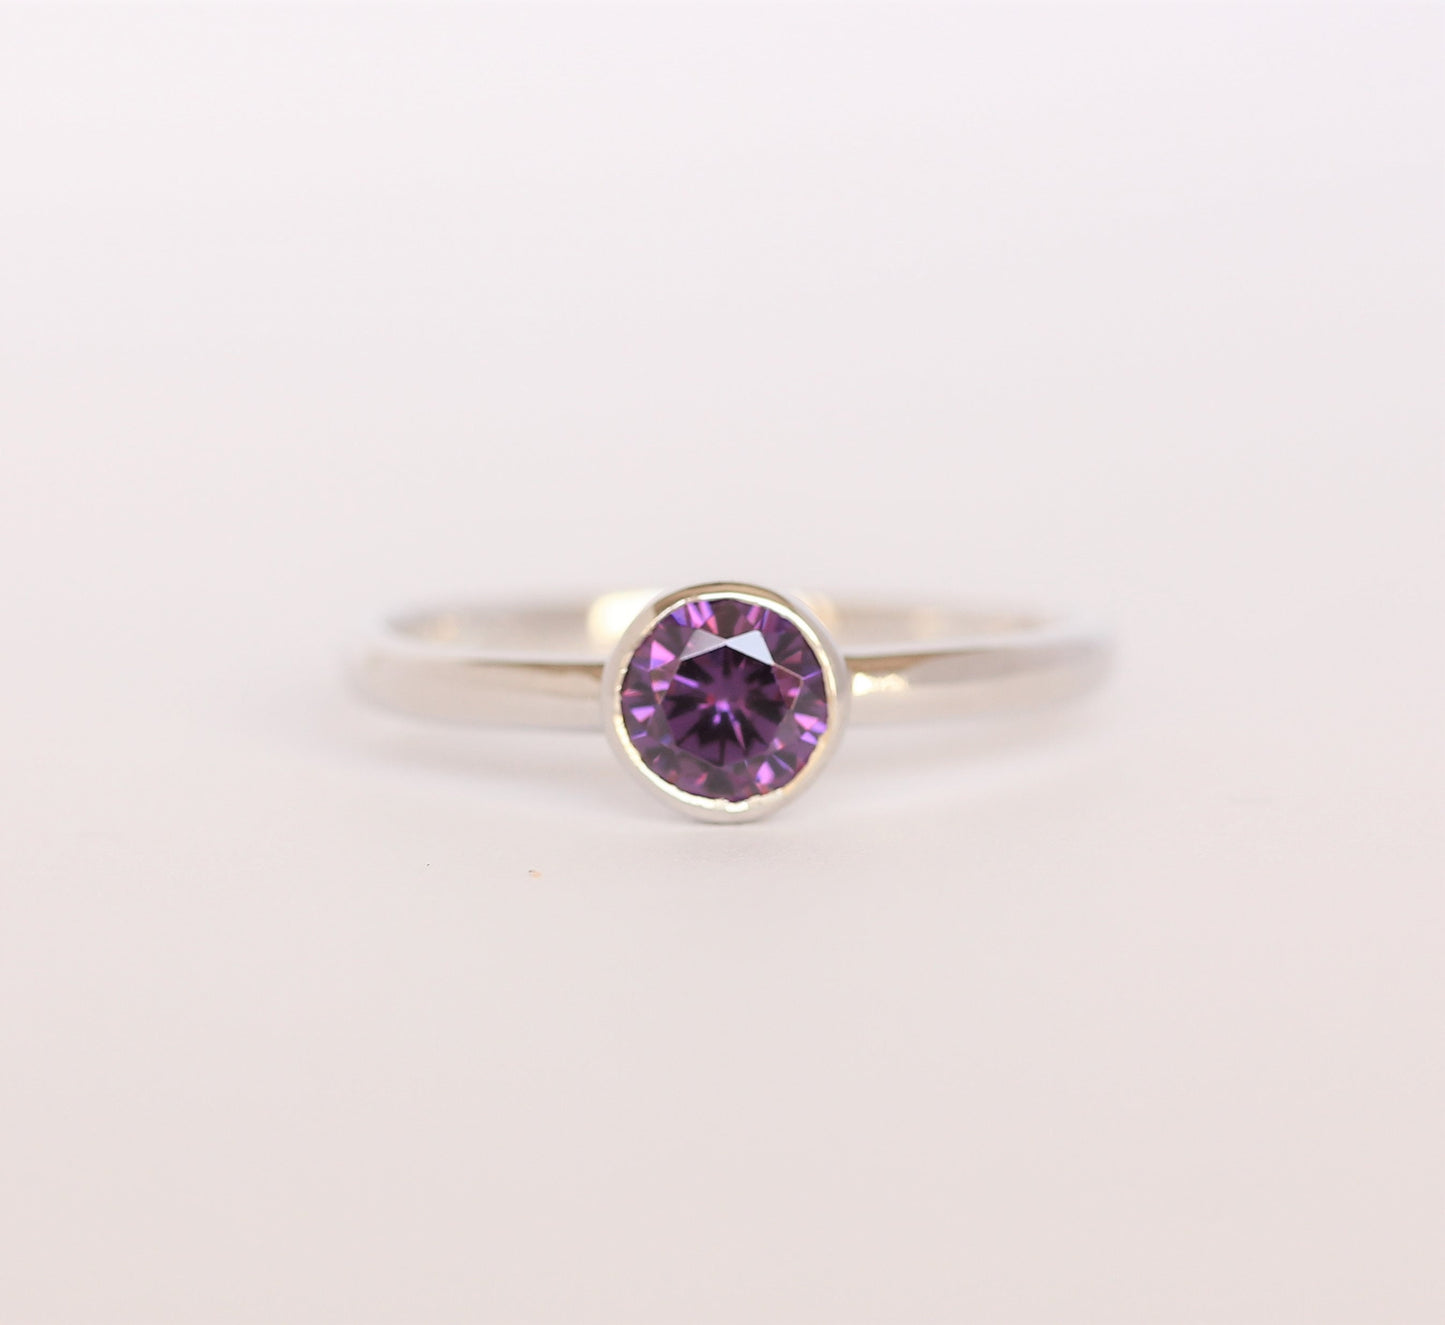 Natural Amethyst bezel set solitaire ring - Available in white gold or sterling silver - handmade ring